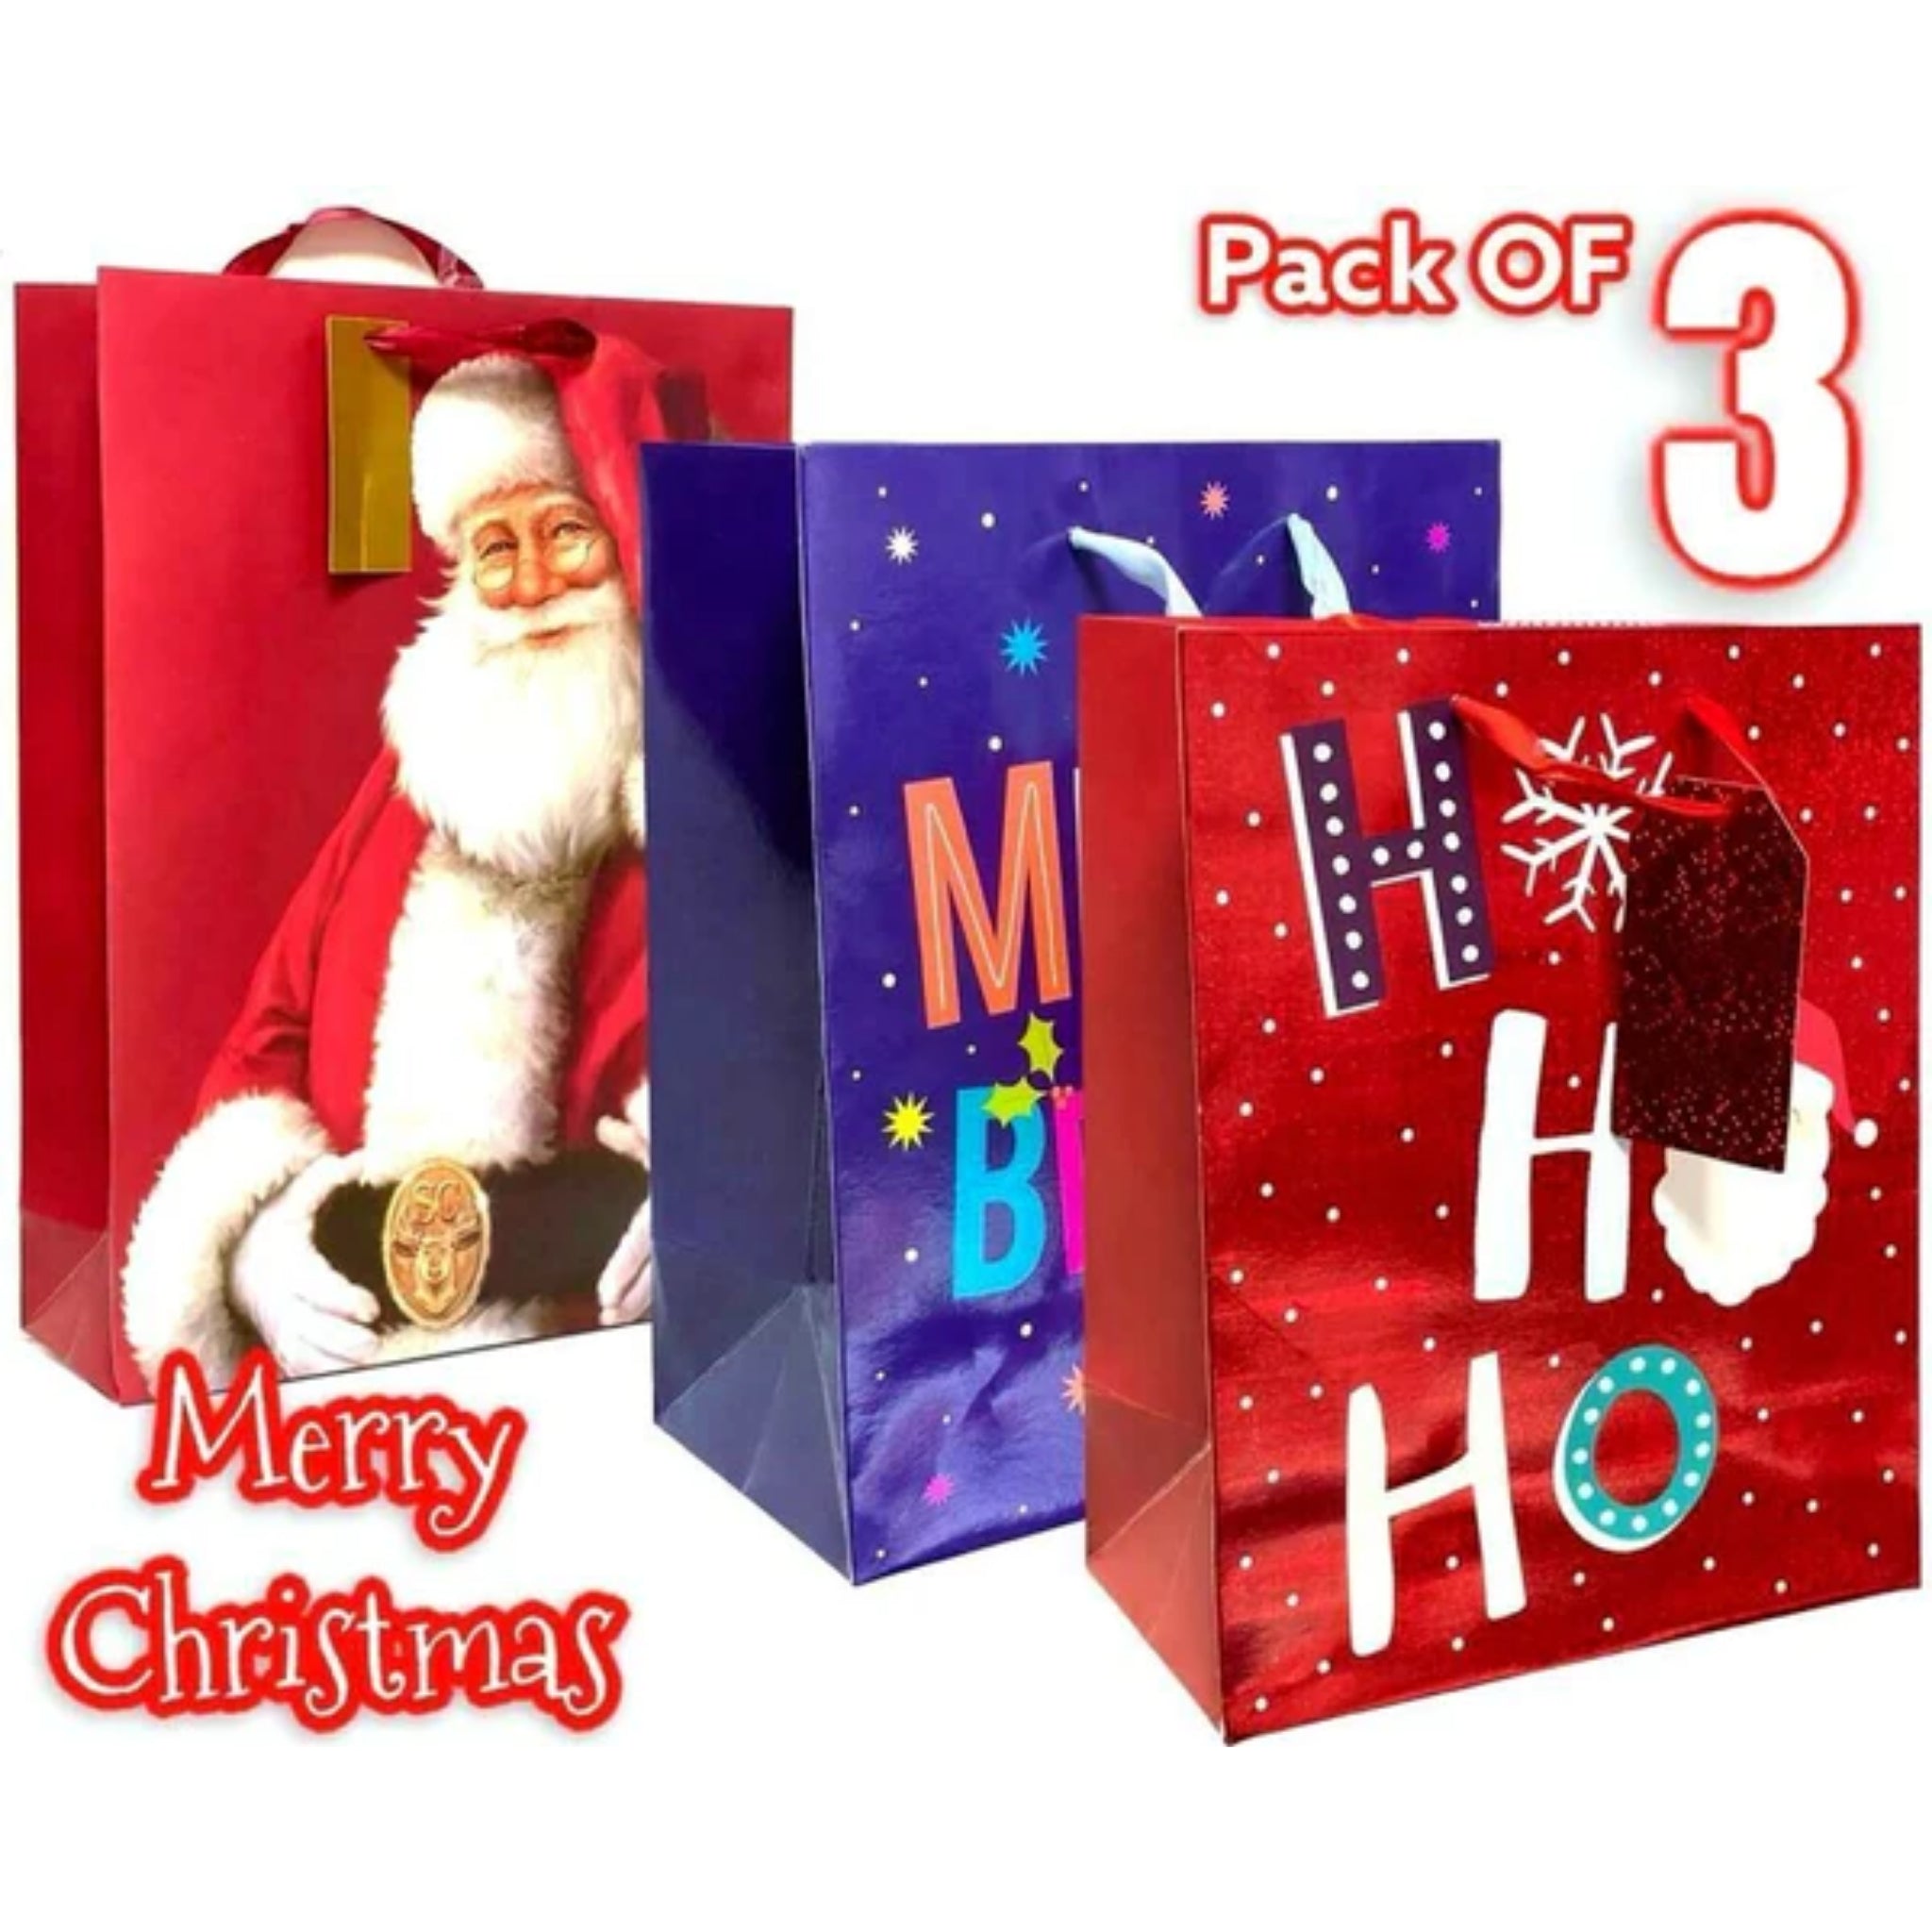 Beclen Harp 3pc Large/X Large/Small Luxury Christmas/Xmas Santa/HoHoHo/Merry&Bright Print Bags With Ribbon And Tag